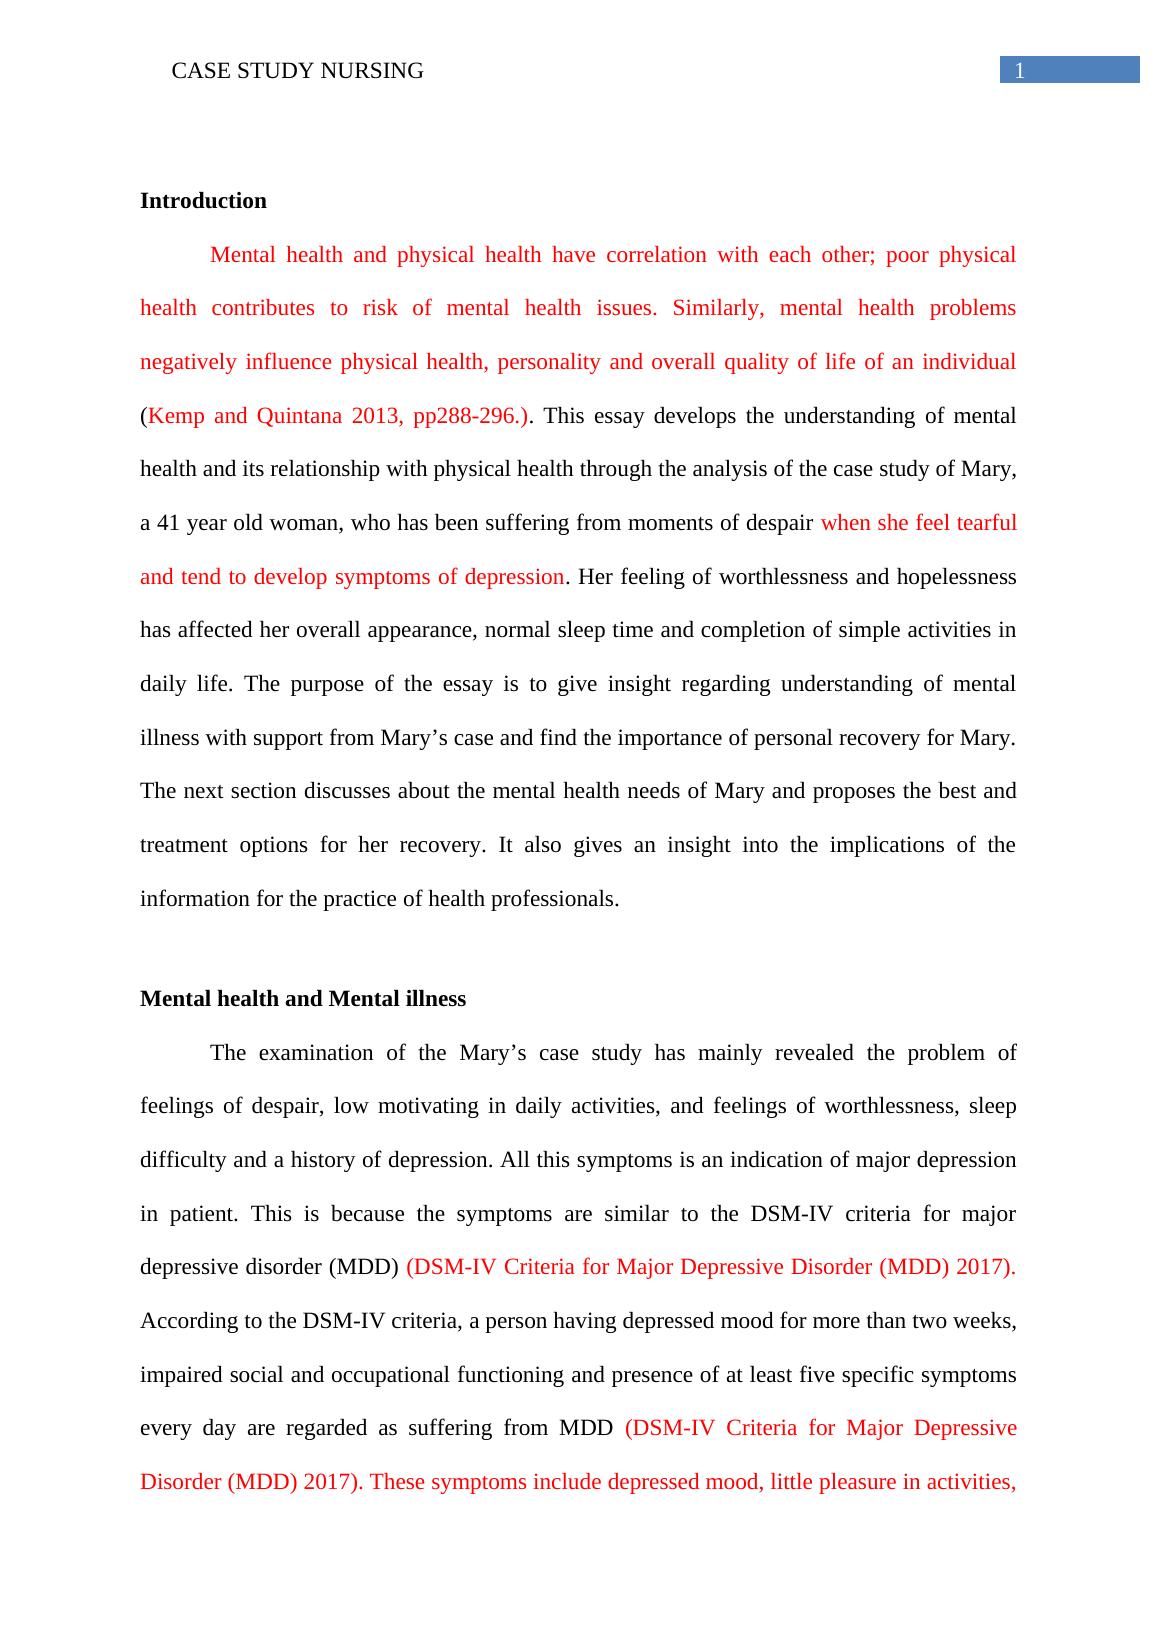 Case Study of Mental Health and Physical Health_2